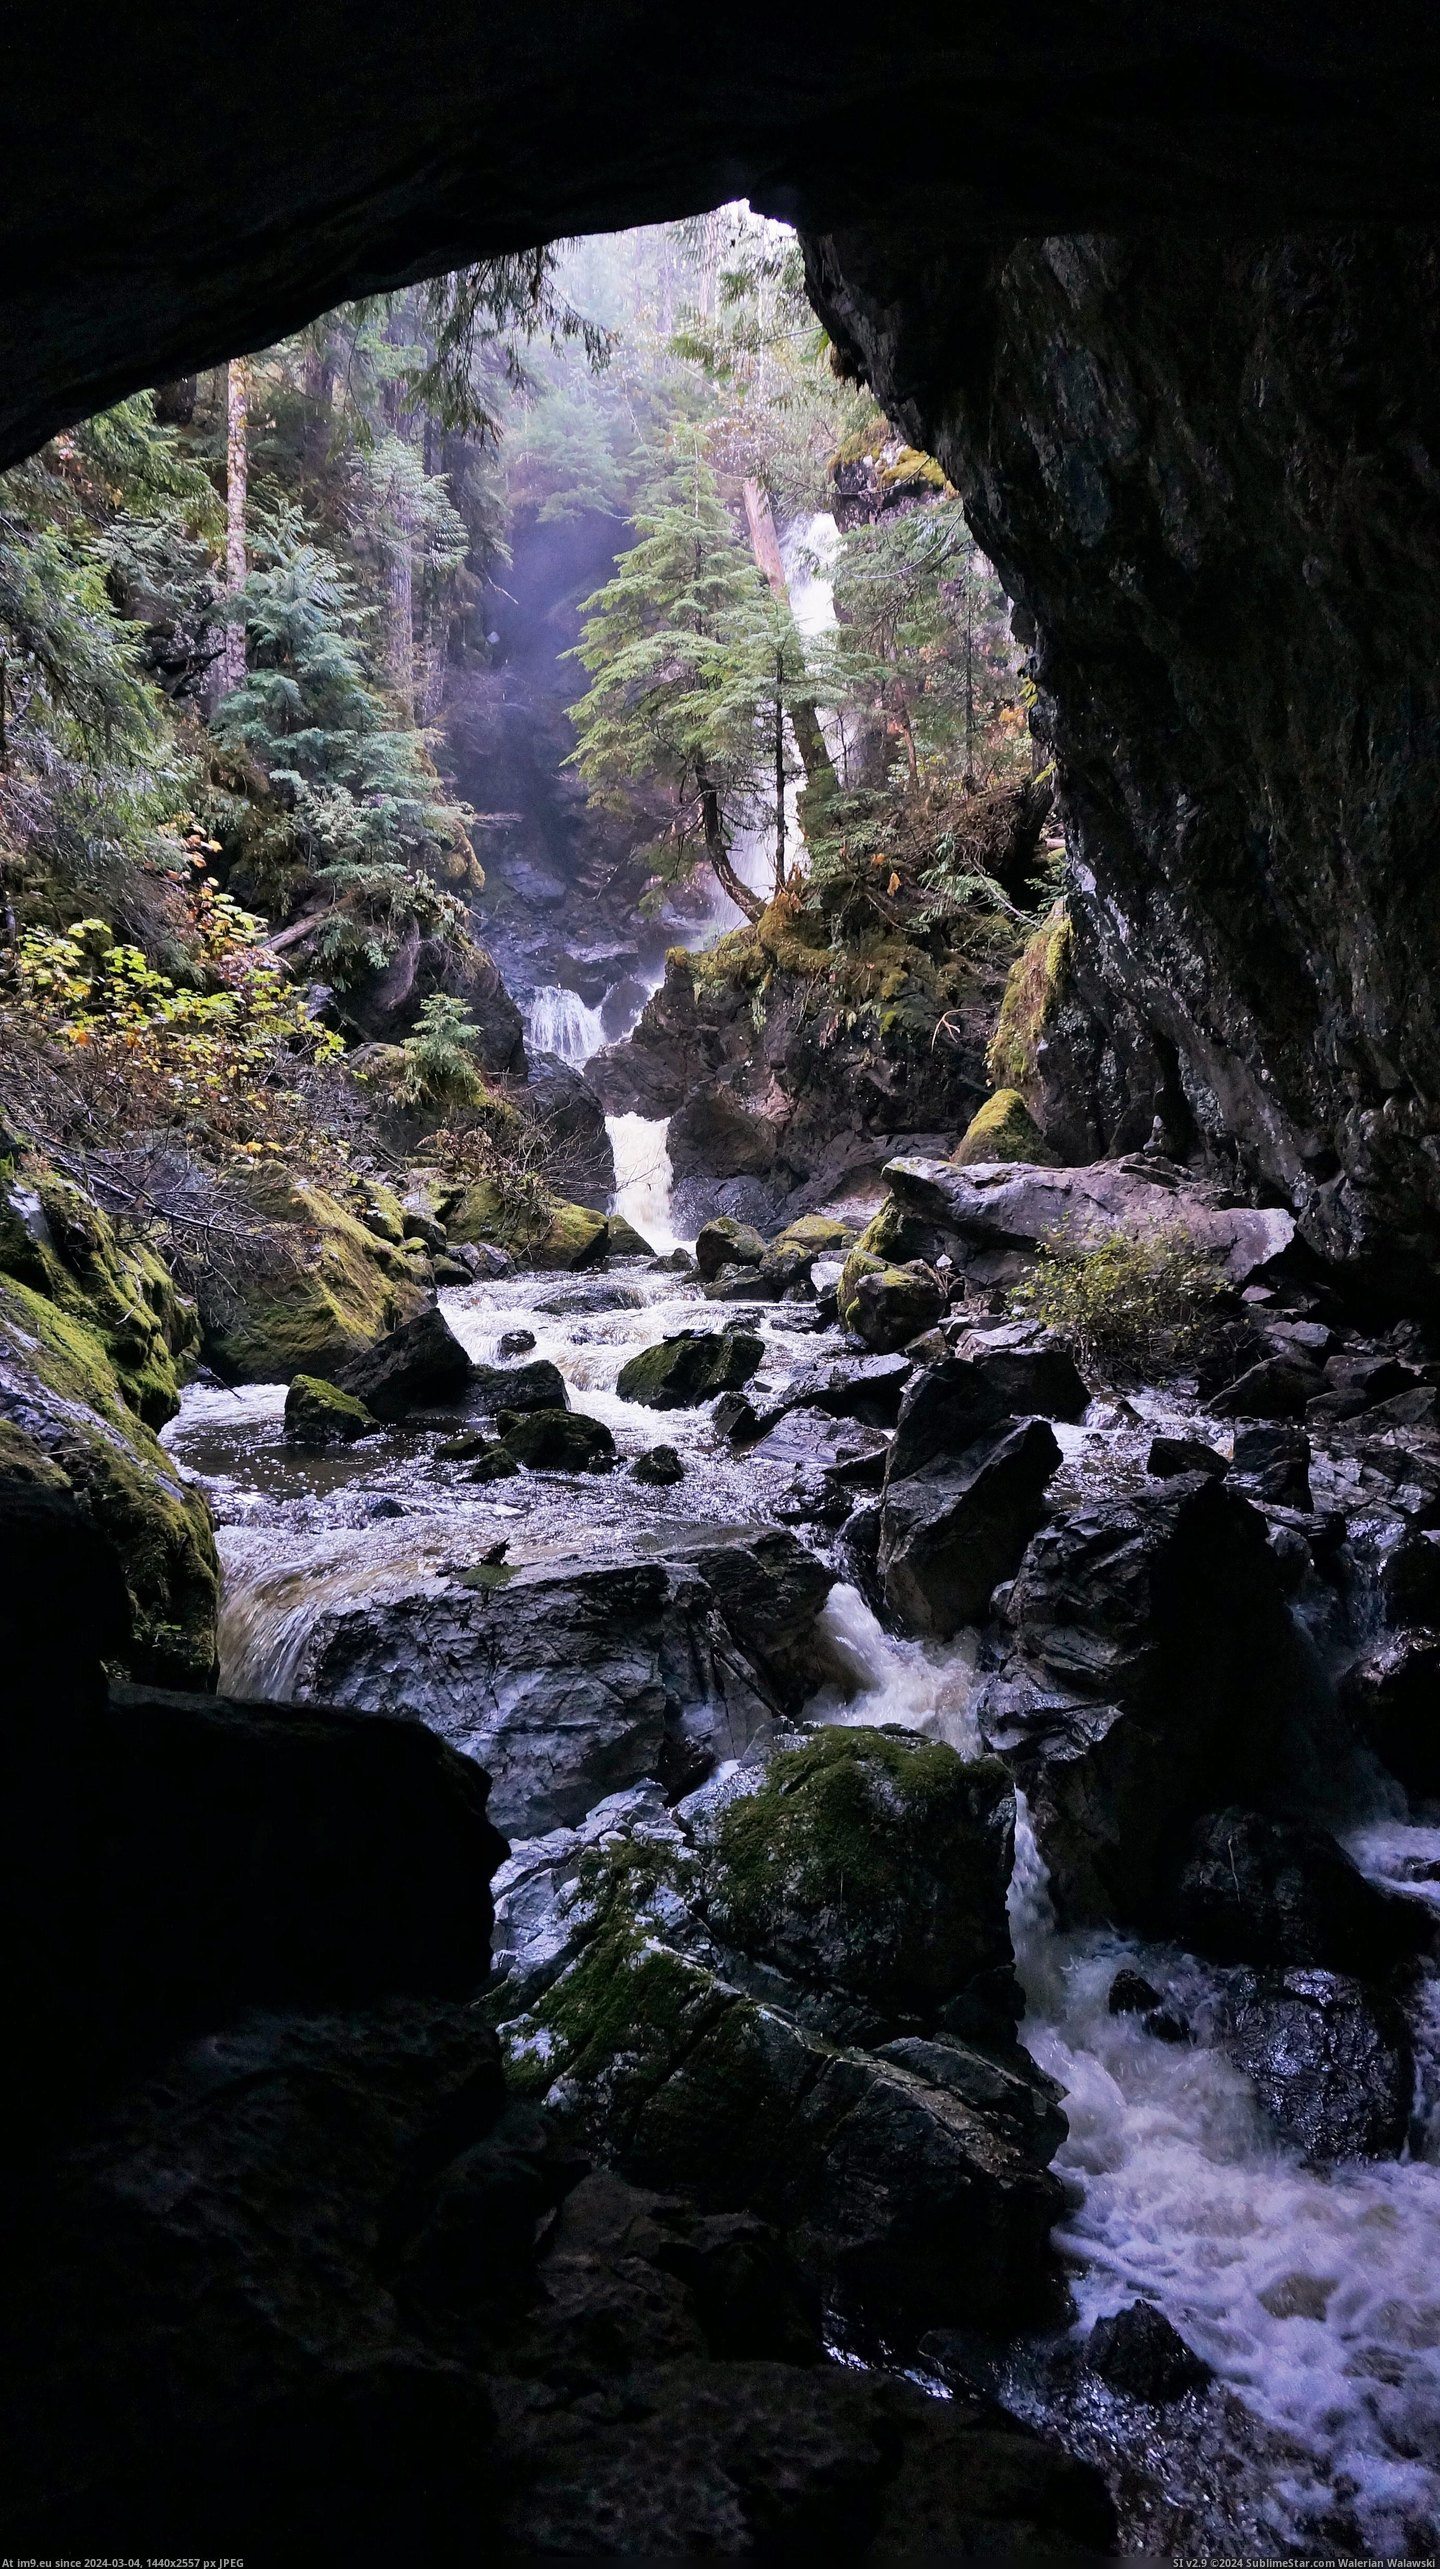 #River #Canada #Entrance #Upana #Gold #Cave [Earthporn] Looking out of the entrance to Upana Cave - Gold River, BC, Canada (OC)(2760x4912) Pic. (Bild von album My r/EARTHPORN favs))